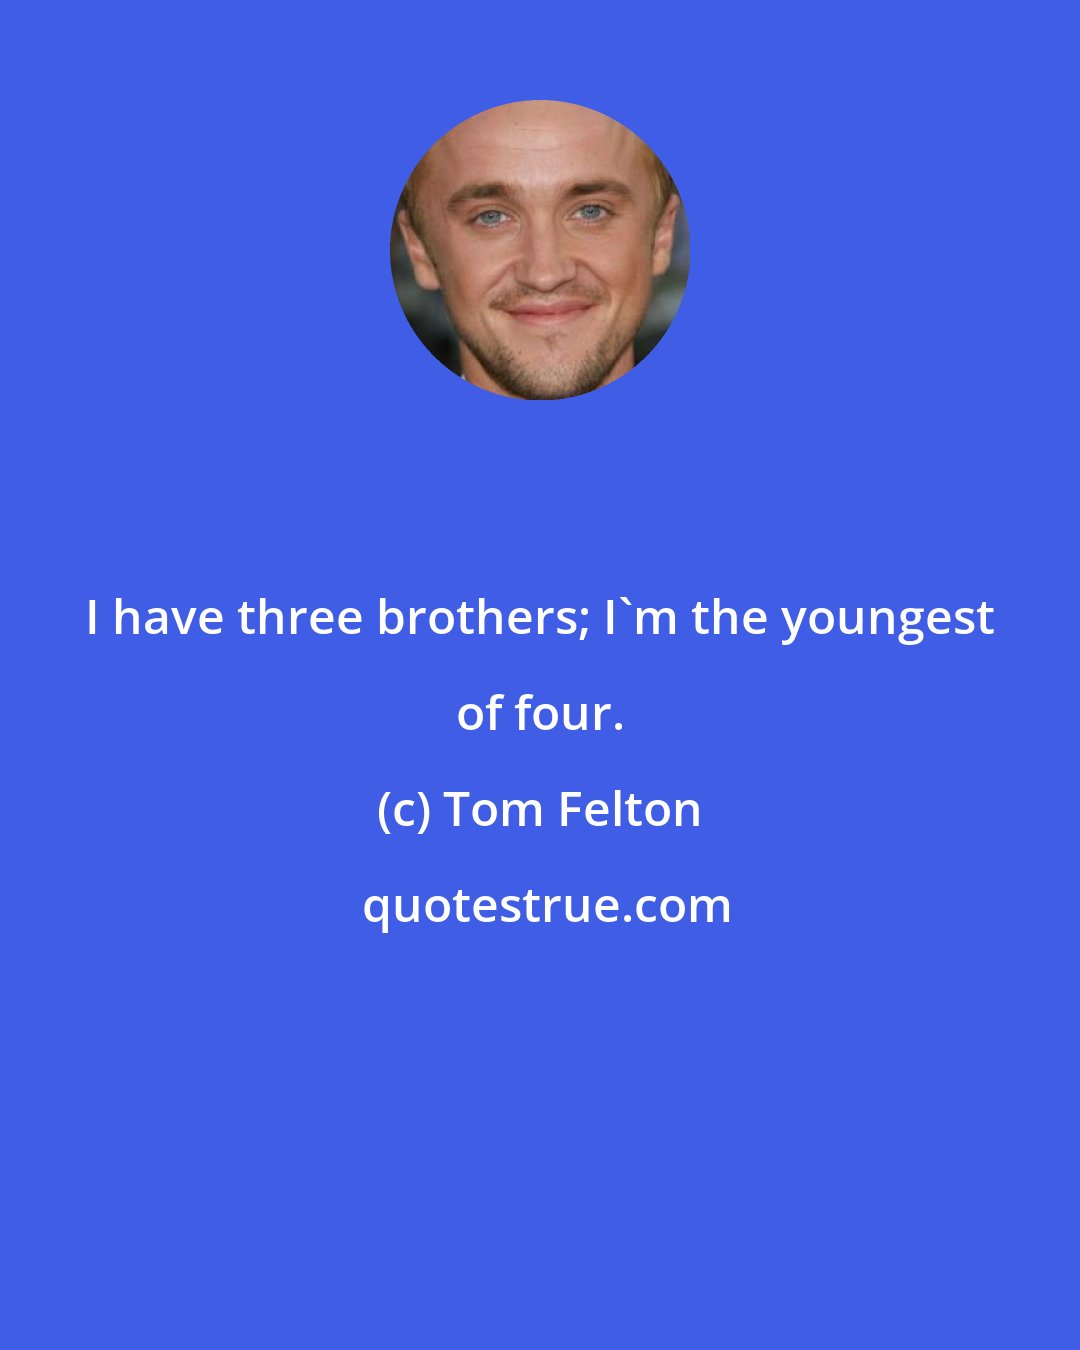 Tom Felton: I have three brothers; I'm the youngest of four.